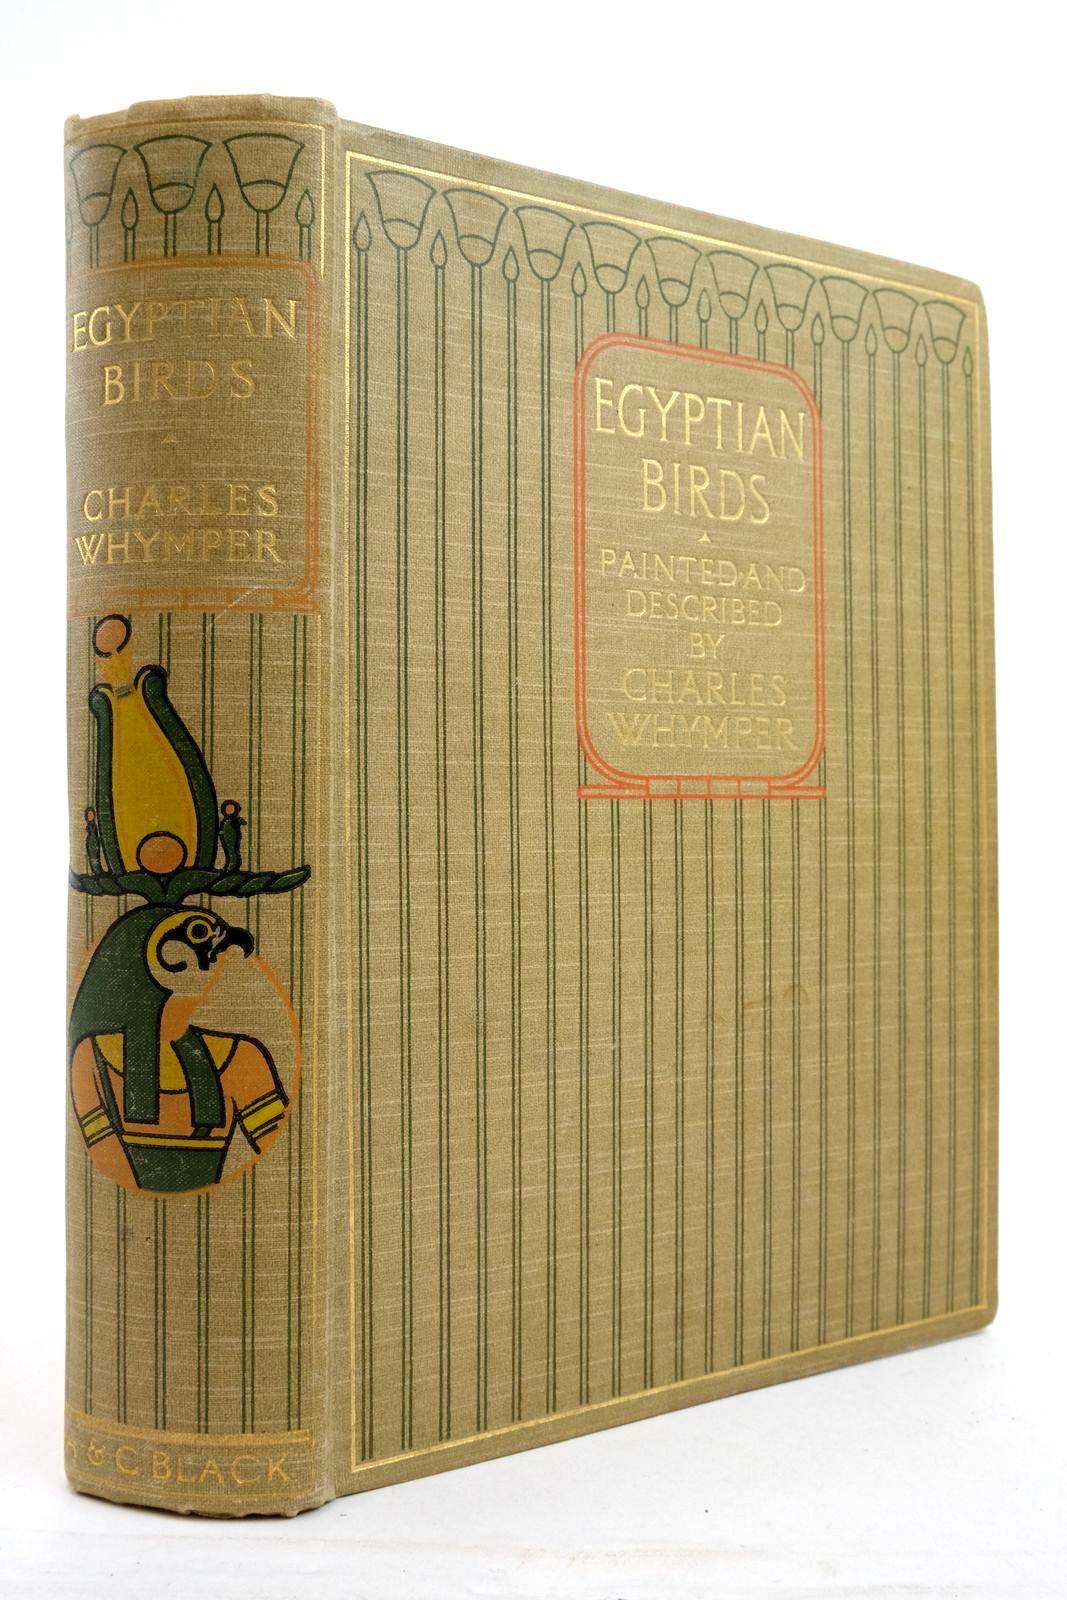 Photo of EGYPTIAN BIRDS written by Whymper, Charles illustrated by Whymper, Charles published by Adam &amp; Charles Black (STOCK CODE: 2137437)  for sale by Stella & Rose's Books